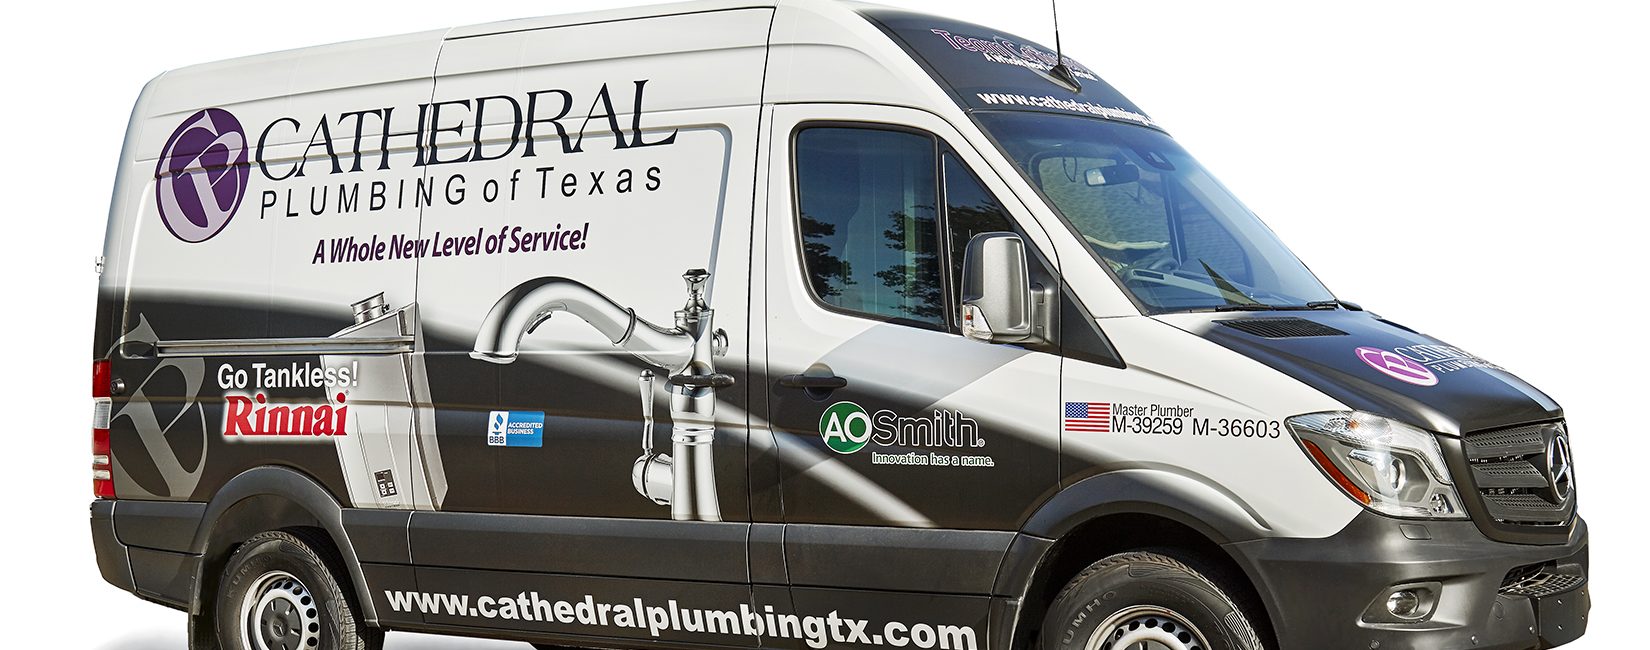 Cathedral Plumbing of Texas, LLC 4